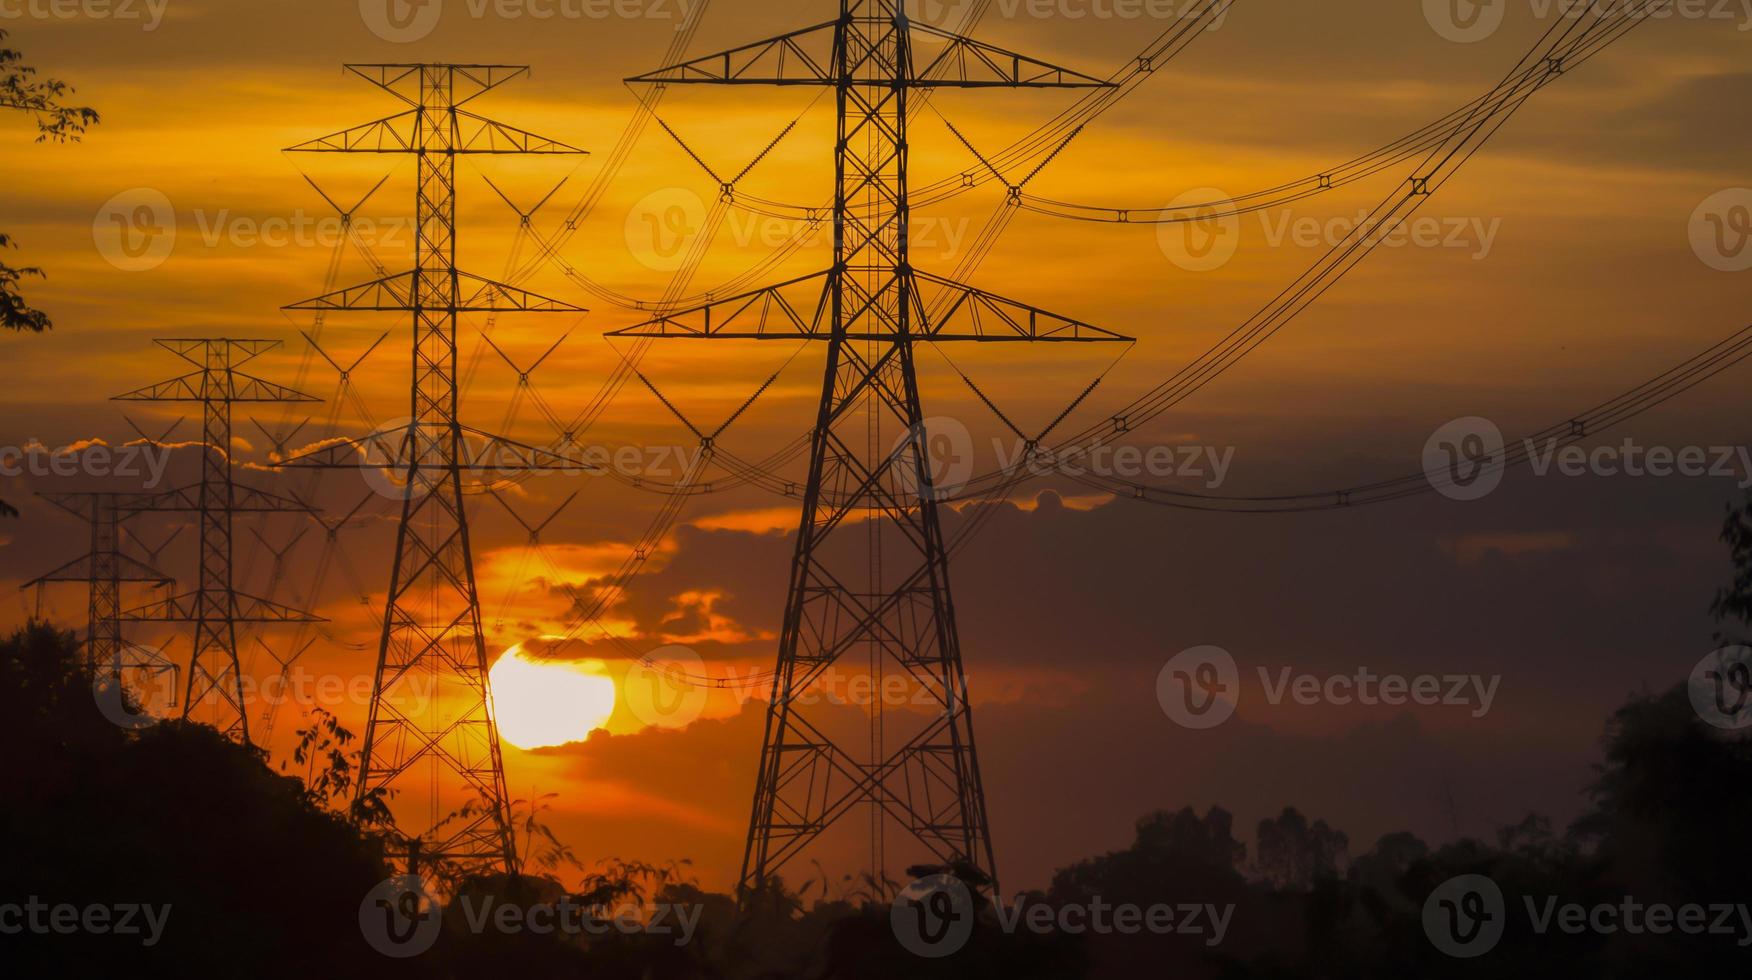 Electrodes, power and energy conservation ideas. During sunset photo